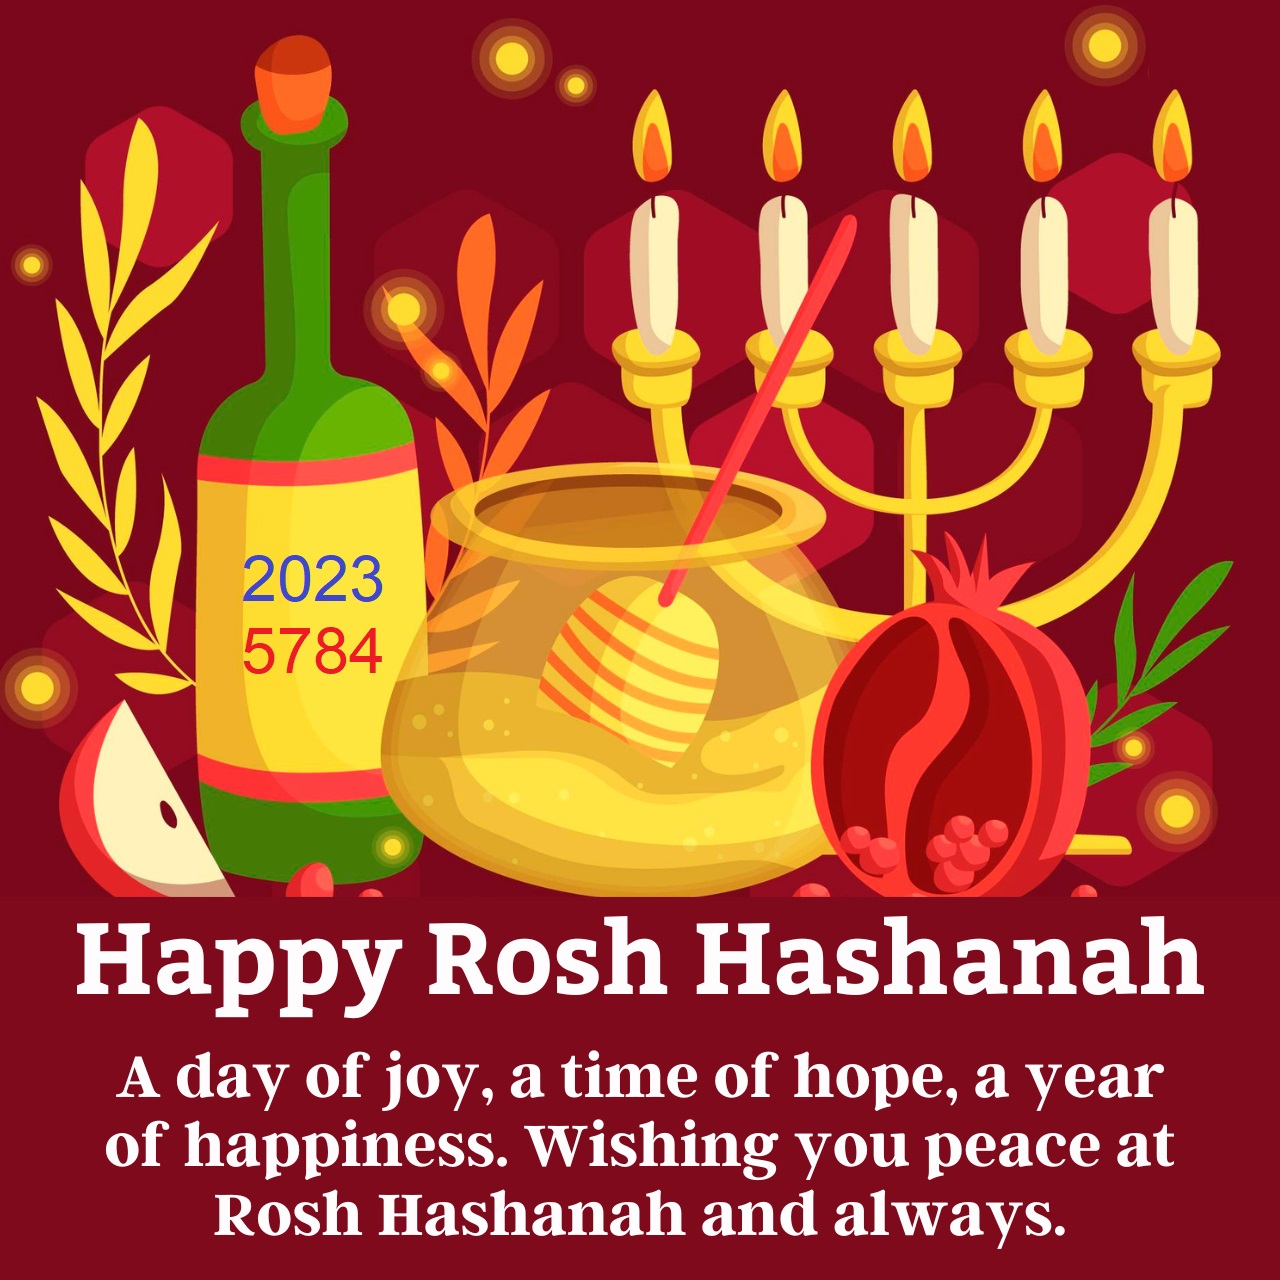 Happy Rosh Hashanah to all who celebrate the Jewish New-Year festival